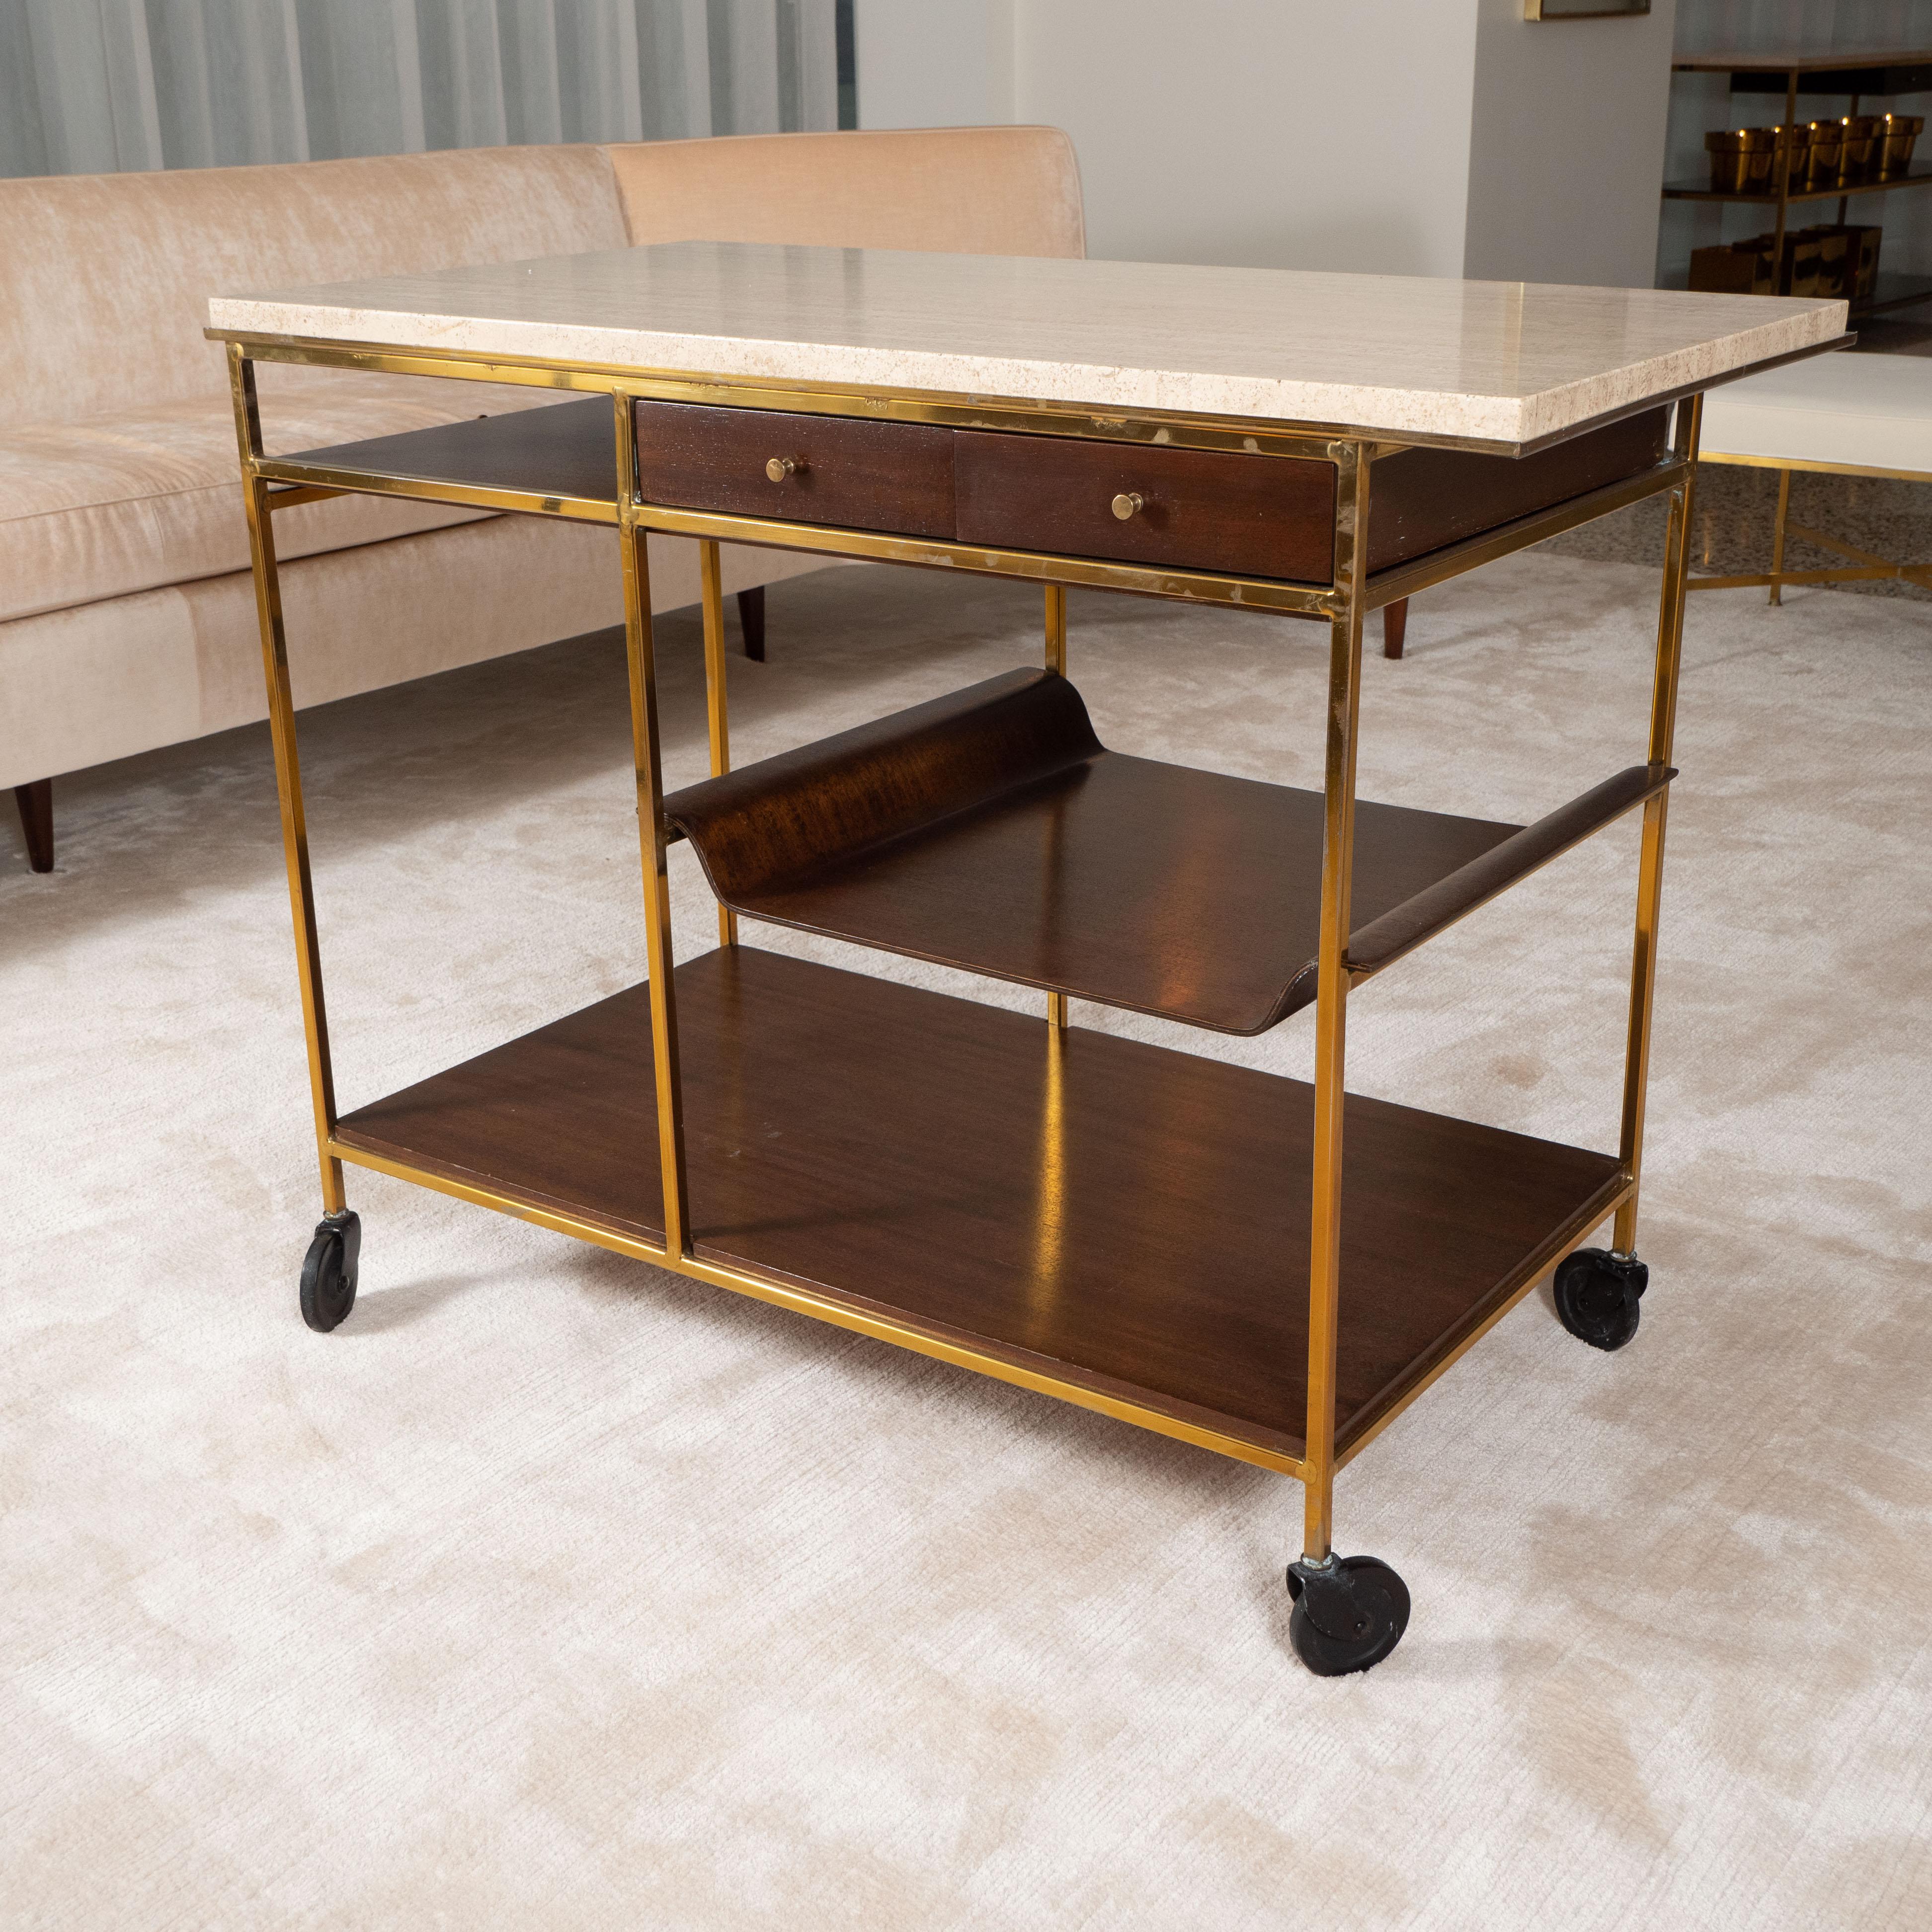 Brass and mahogany bar cart by Paul McCobb; features a travertine top above a slide and detachable tray, complemented by two side by side drawers and multiple shelves.

Signed with label to drawer inscribed calvin grand rapids the irwin collection